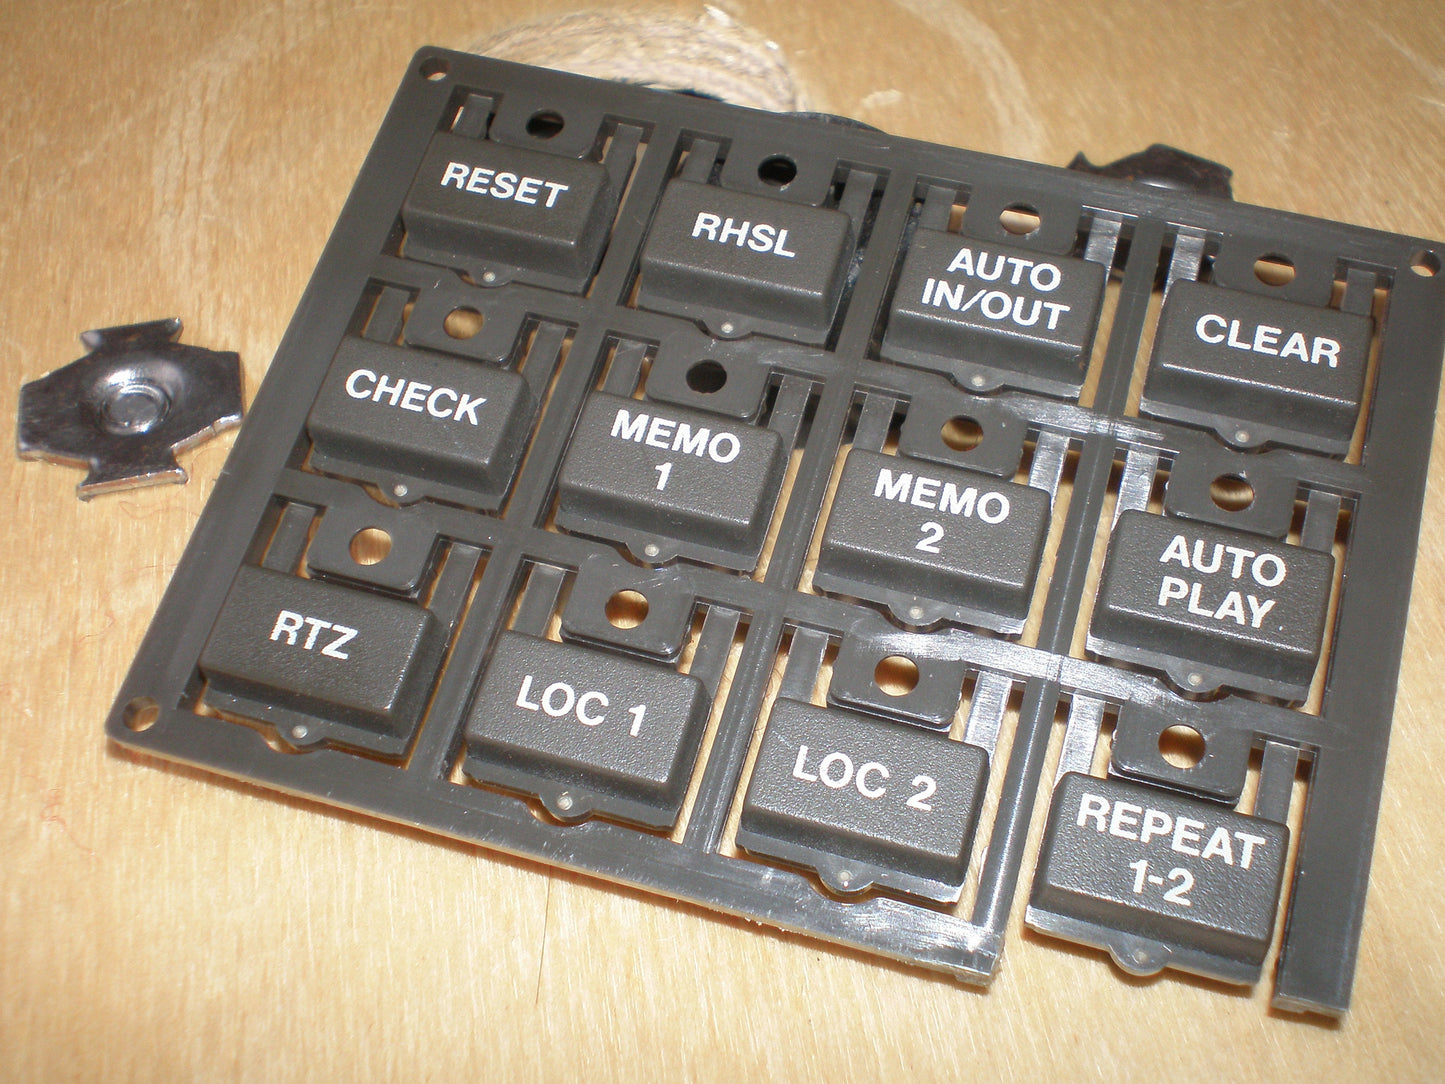 Tascam TSR-8 front panel push button 12 way